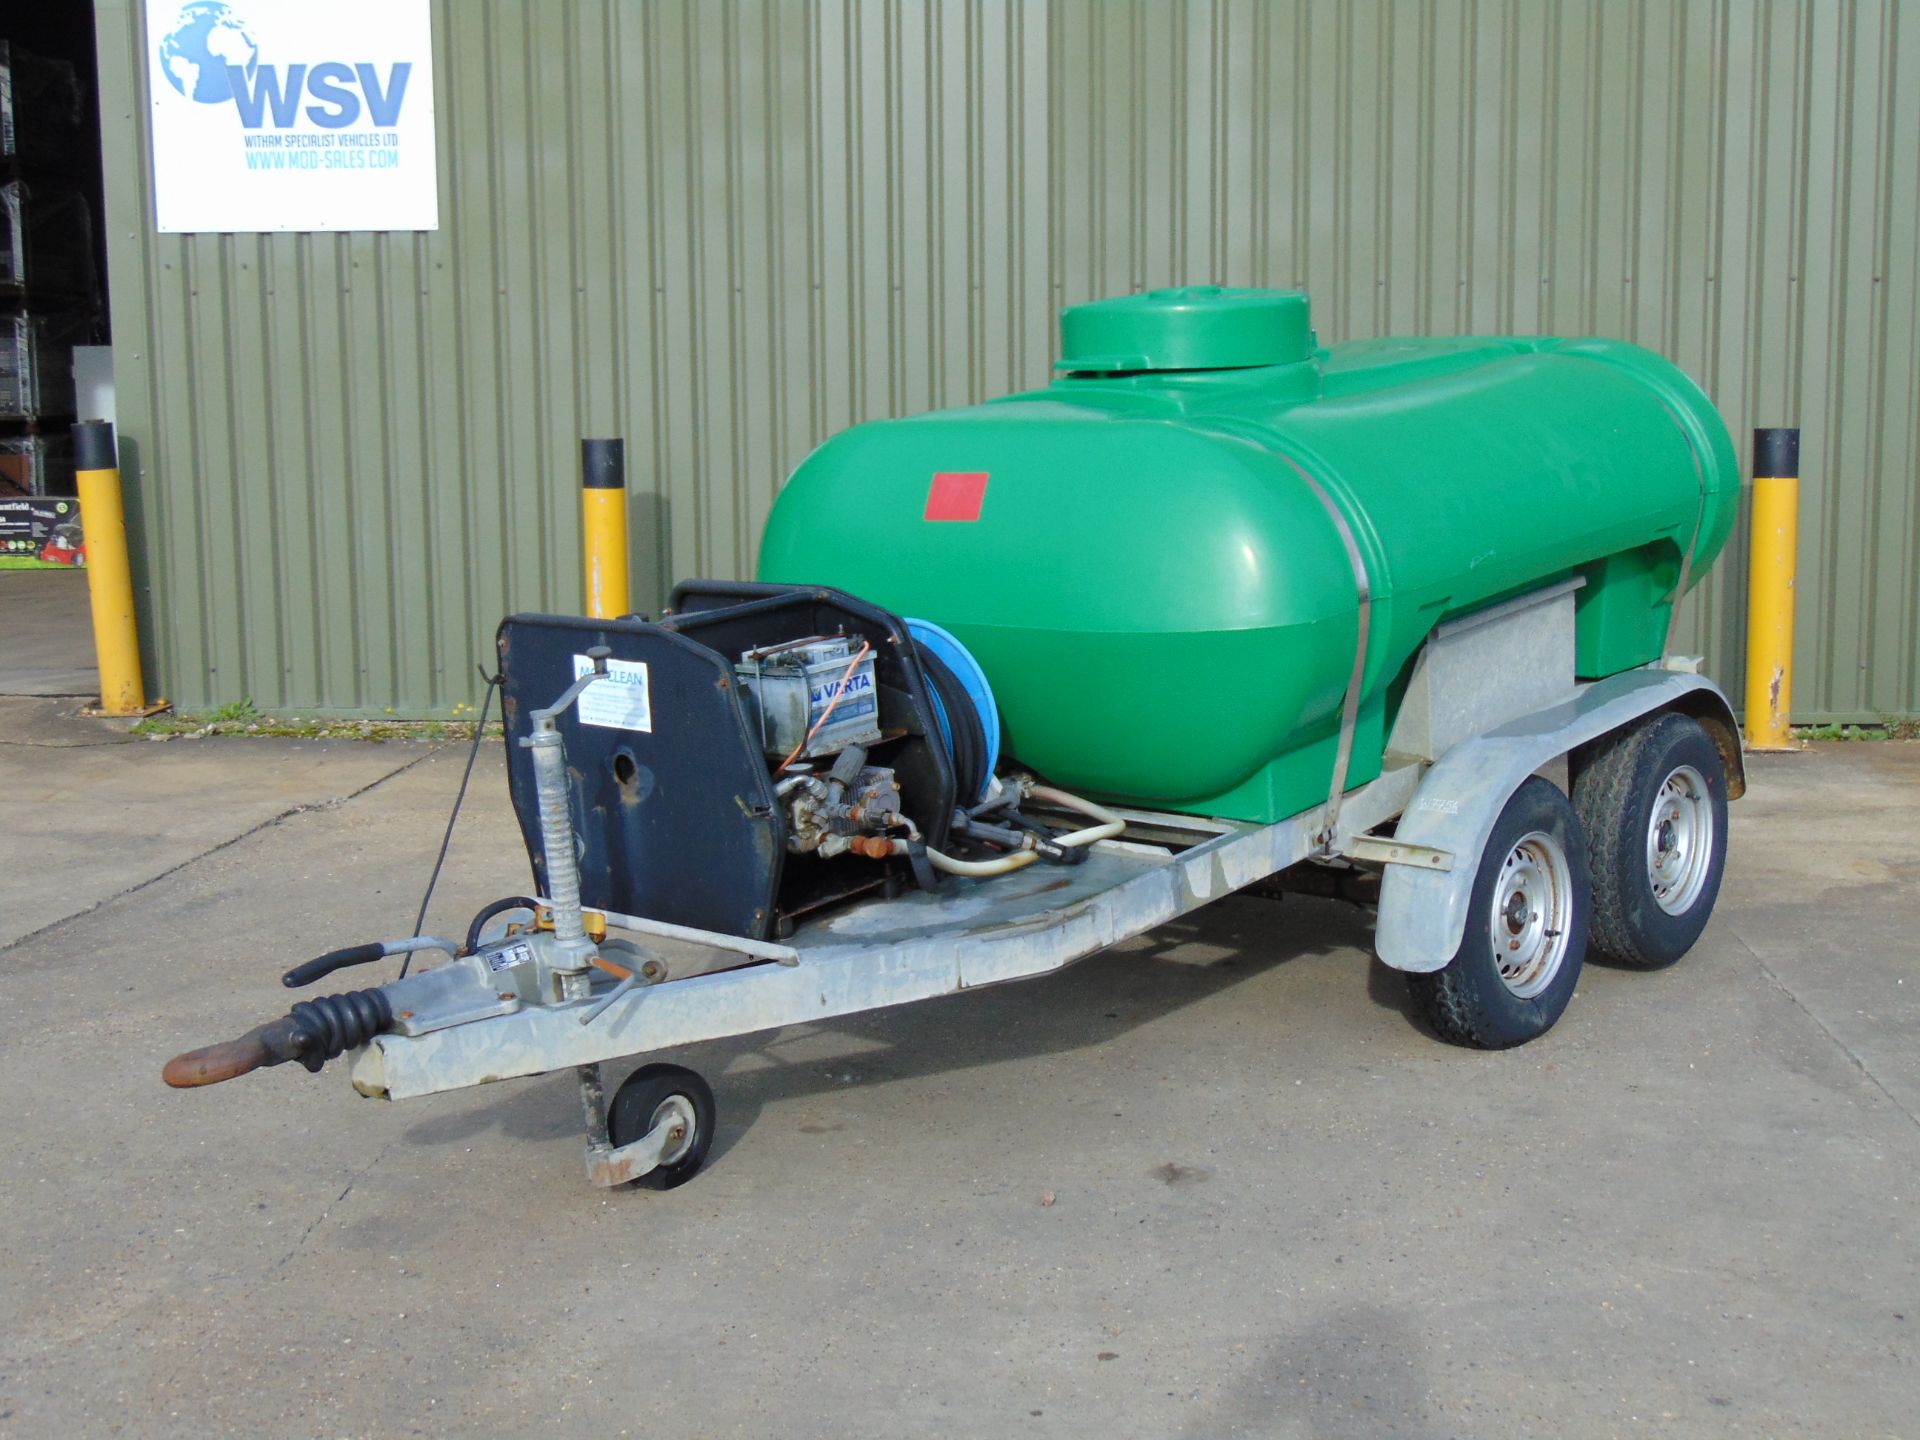 Morclean Trailer Mounted Pressure Washer with 2250 litre Water Tank and Yanmar Diesel Engine